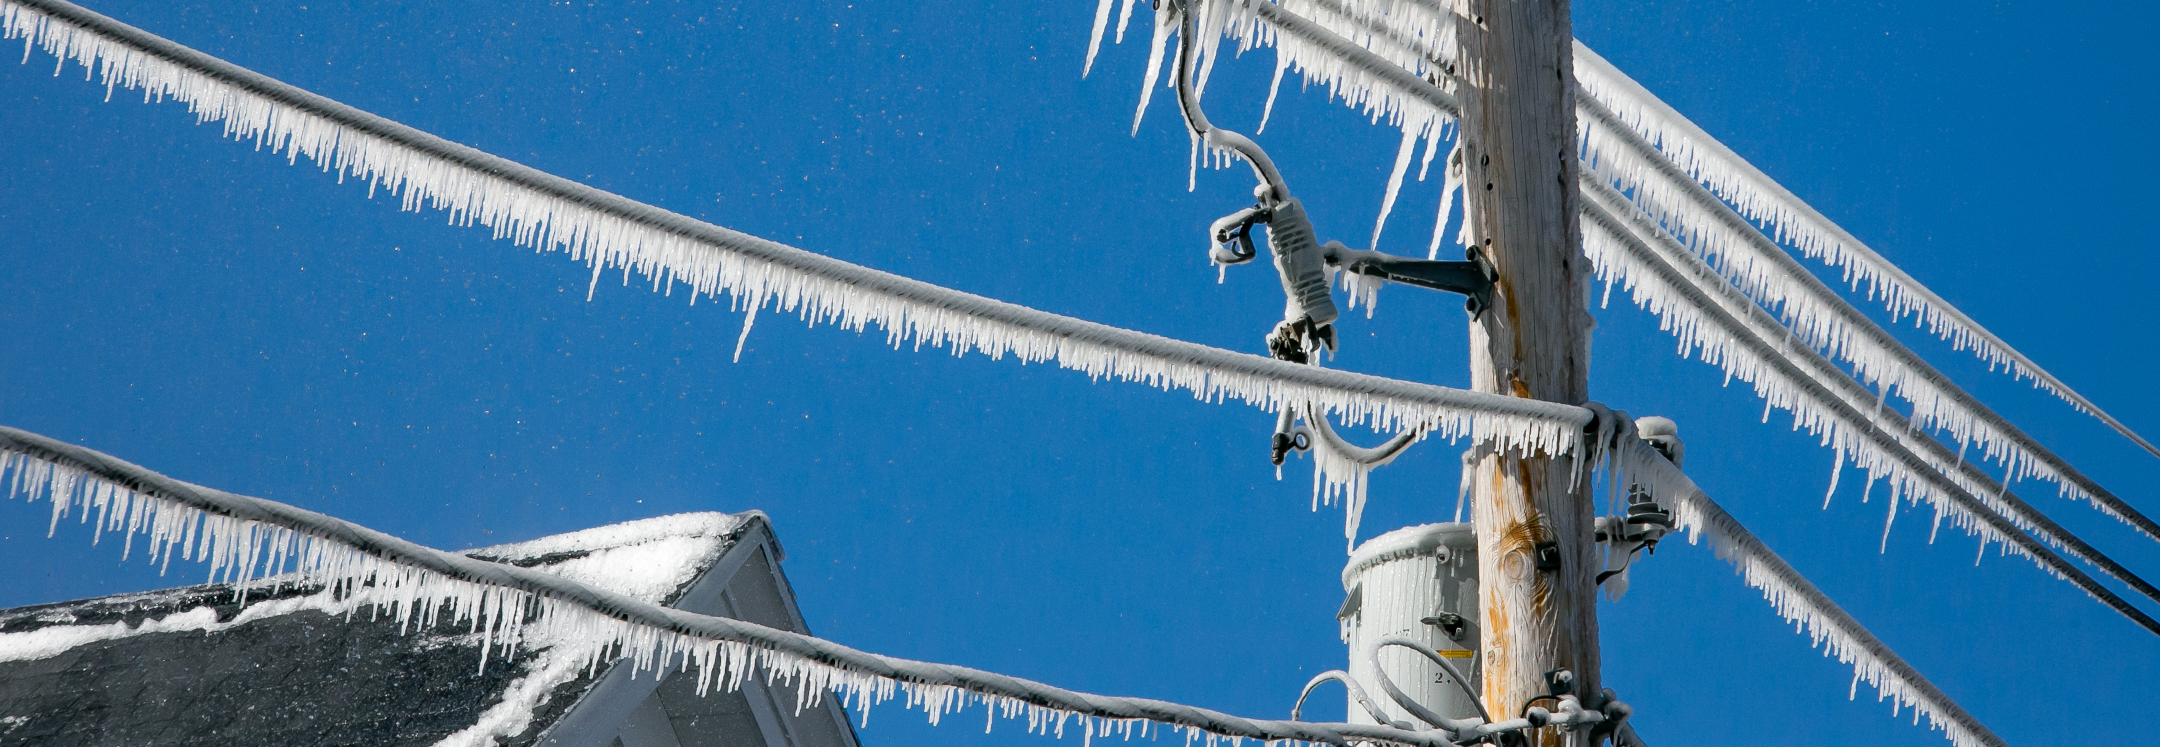 Freezing rain causing power outages and frozen power lines